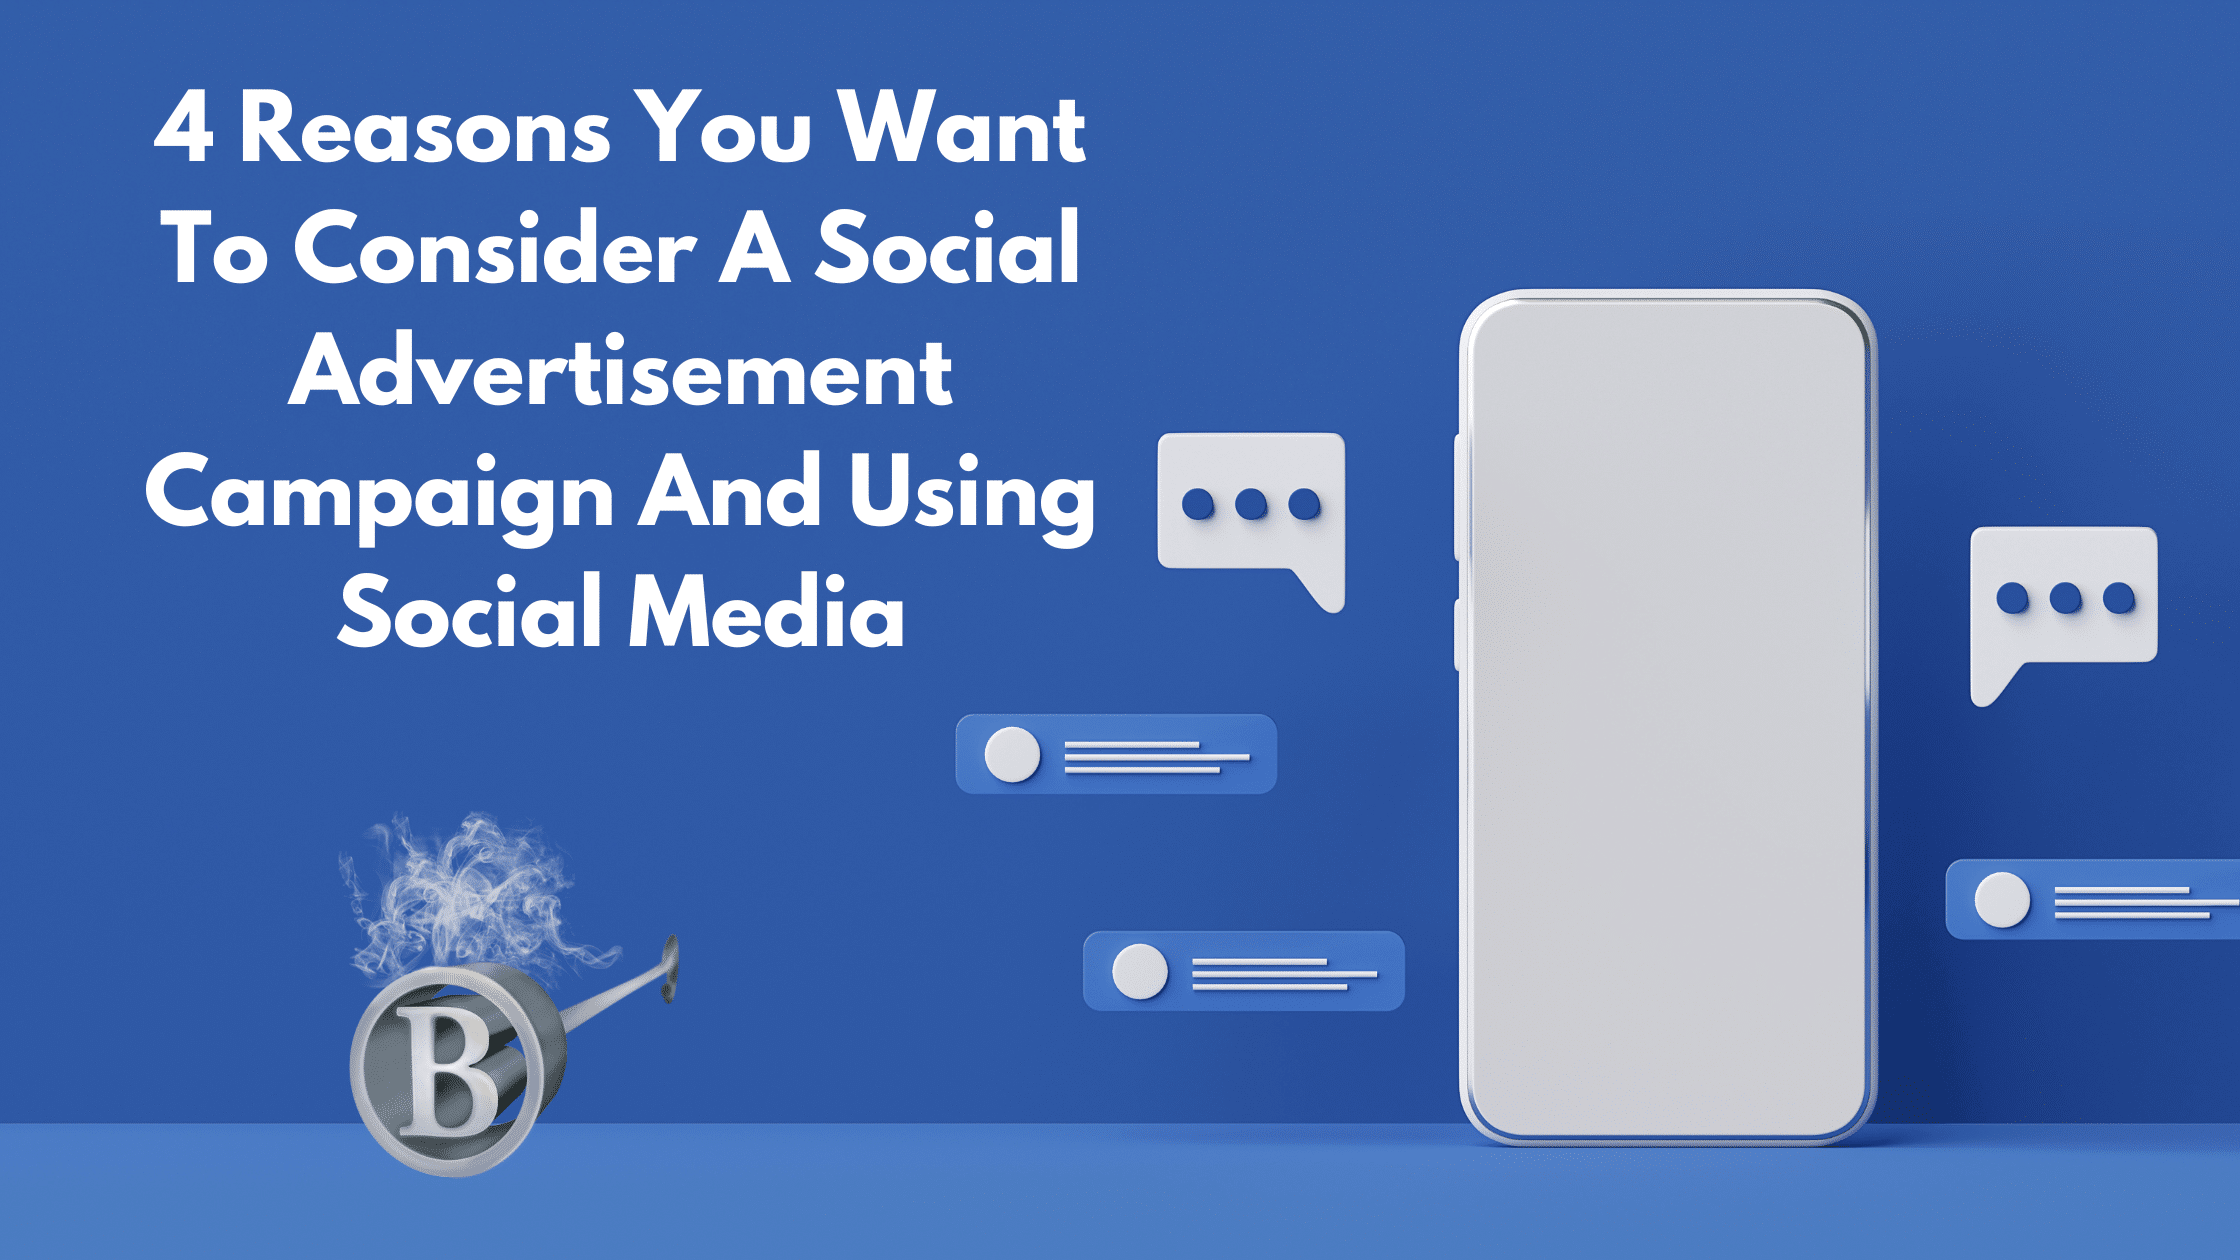 4 Reasons You Want To Consider A Social Advertisement  Campaign